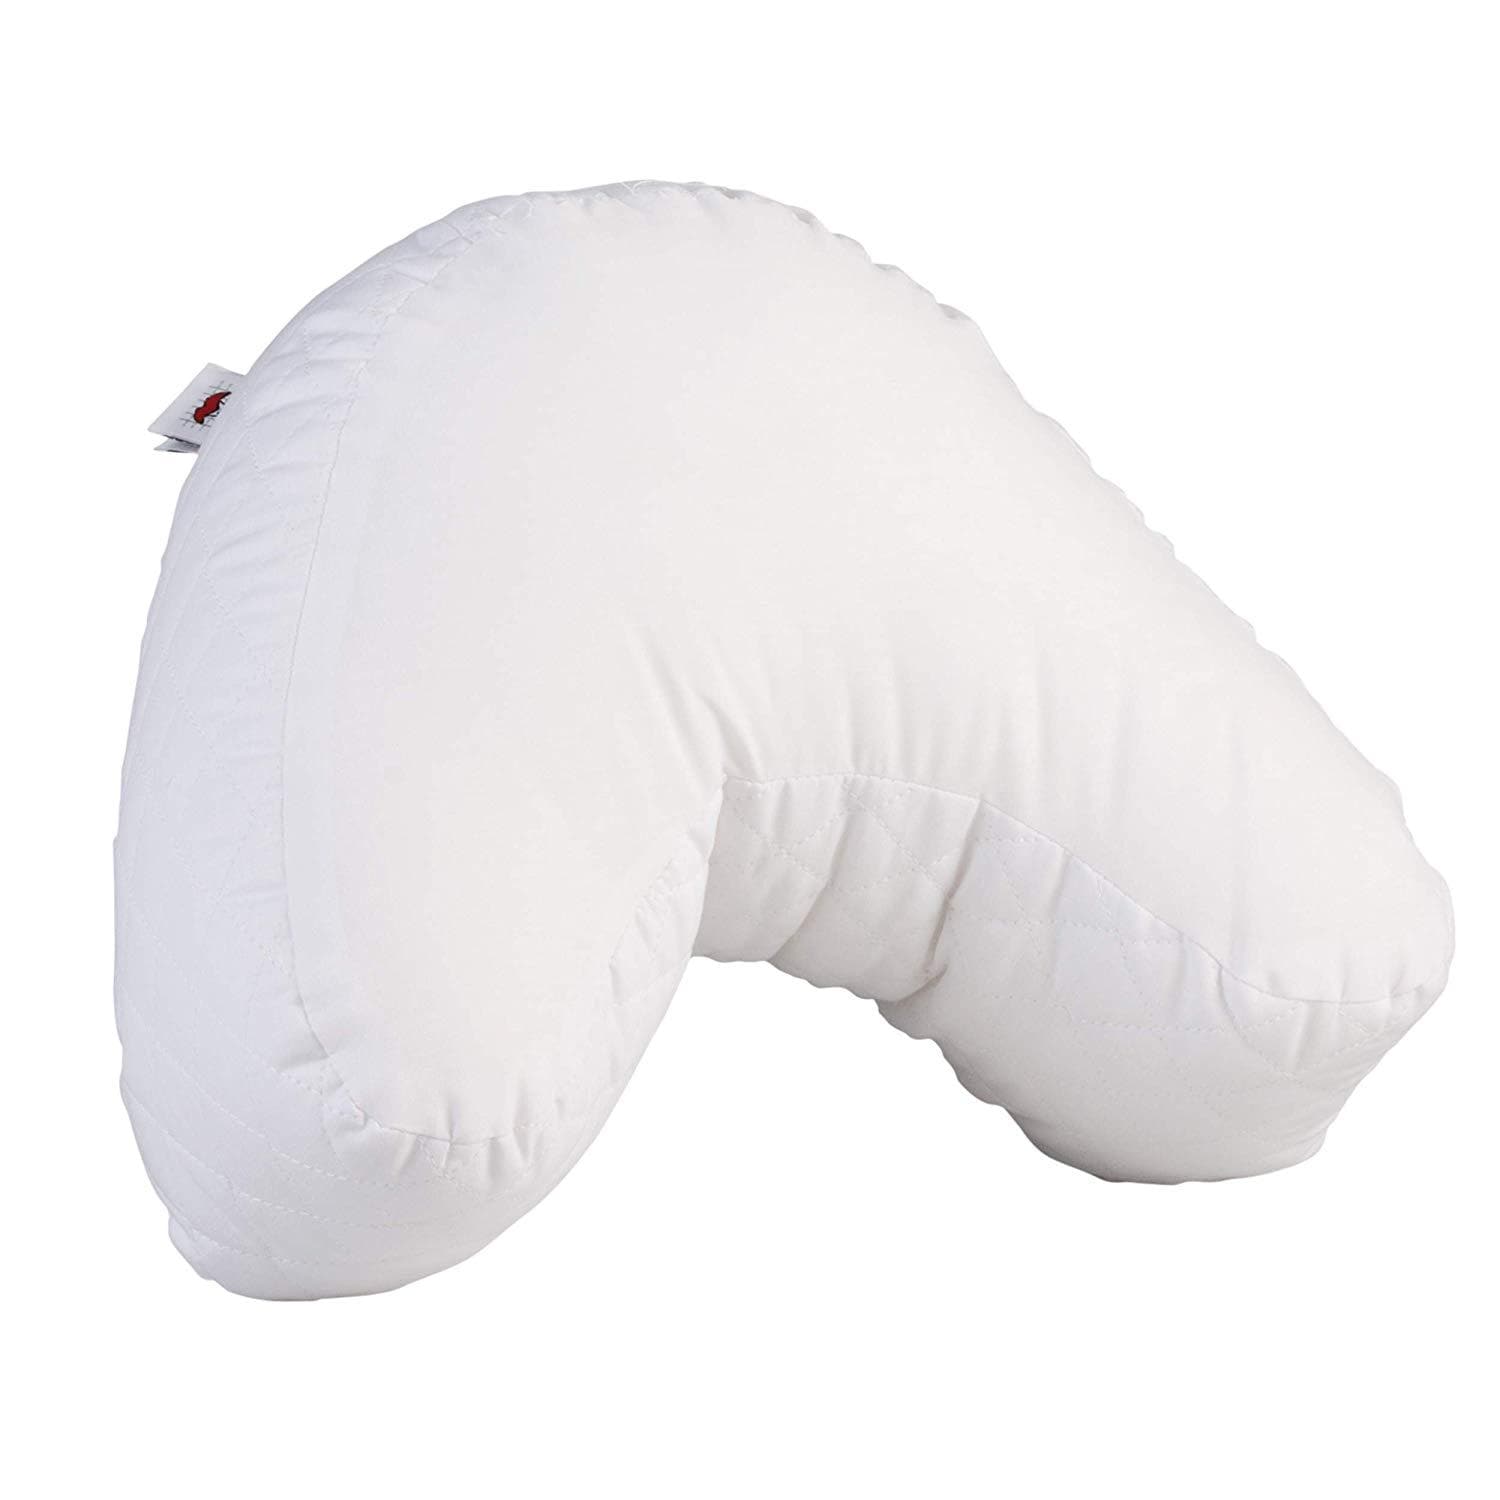 Core Products Side Sleeping Deluxe Comfort Fiber CPAP Pillows - Senior.com Pillows